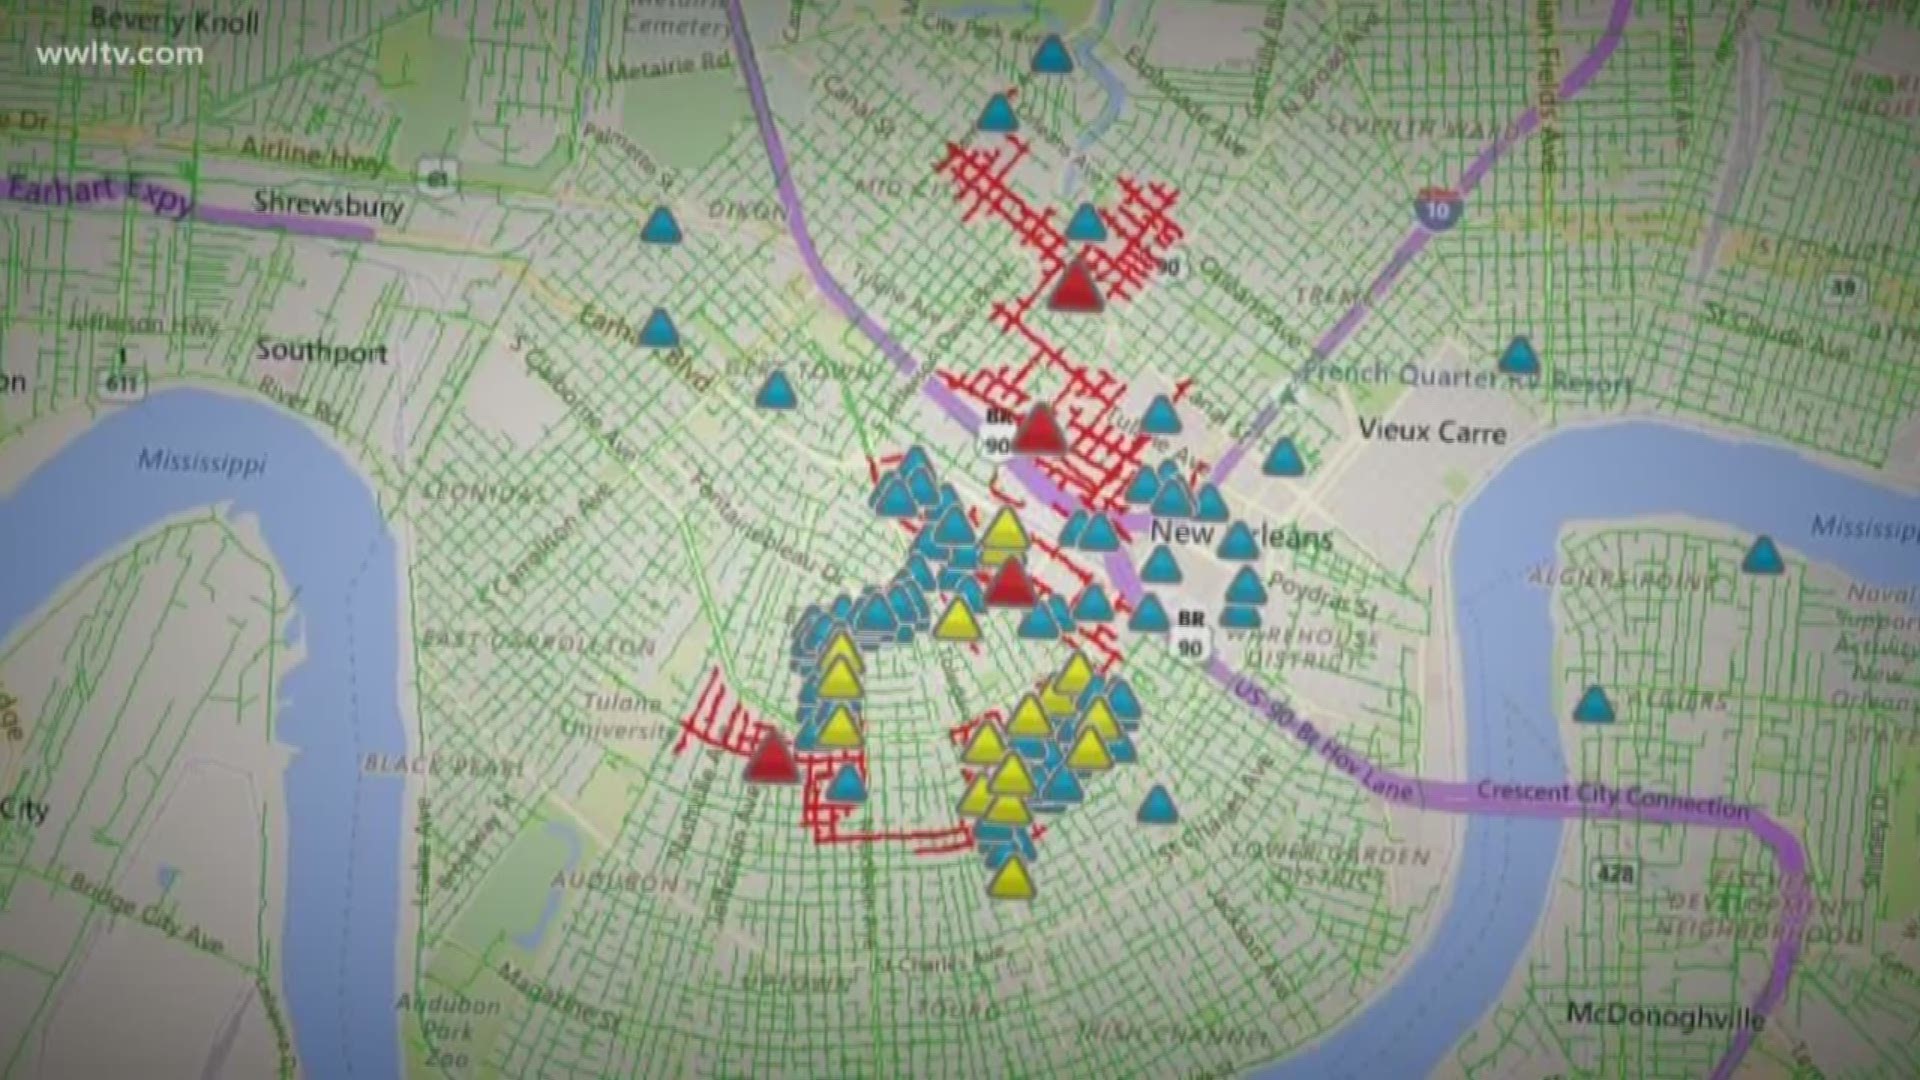 The outages began around 8:30 a.m. Monday morning. All of the 7,556 people who lost power in Mid-City, Central City and Uptown, had power back before noon according to the Entergy New Orleans outage map.